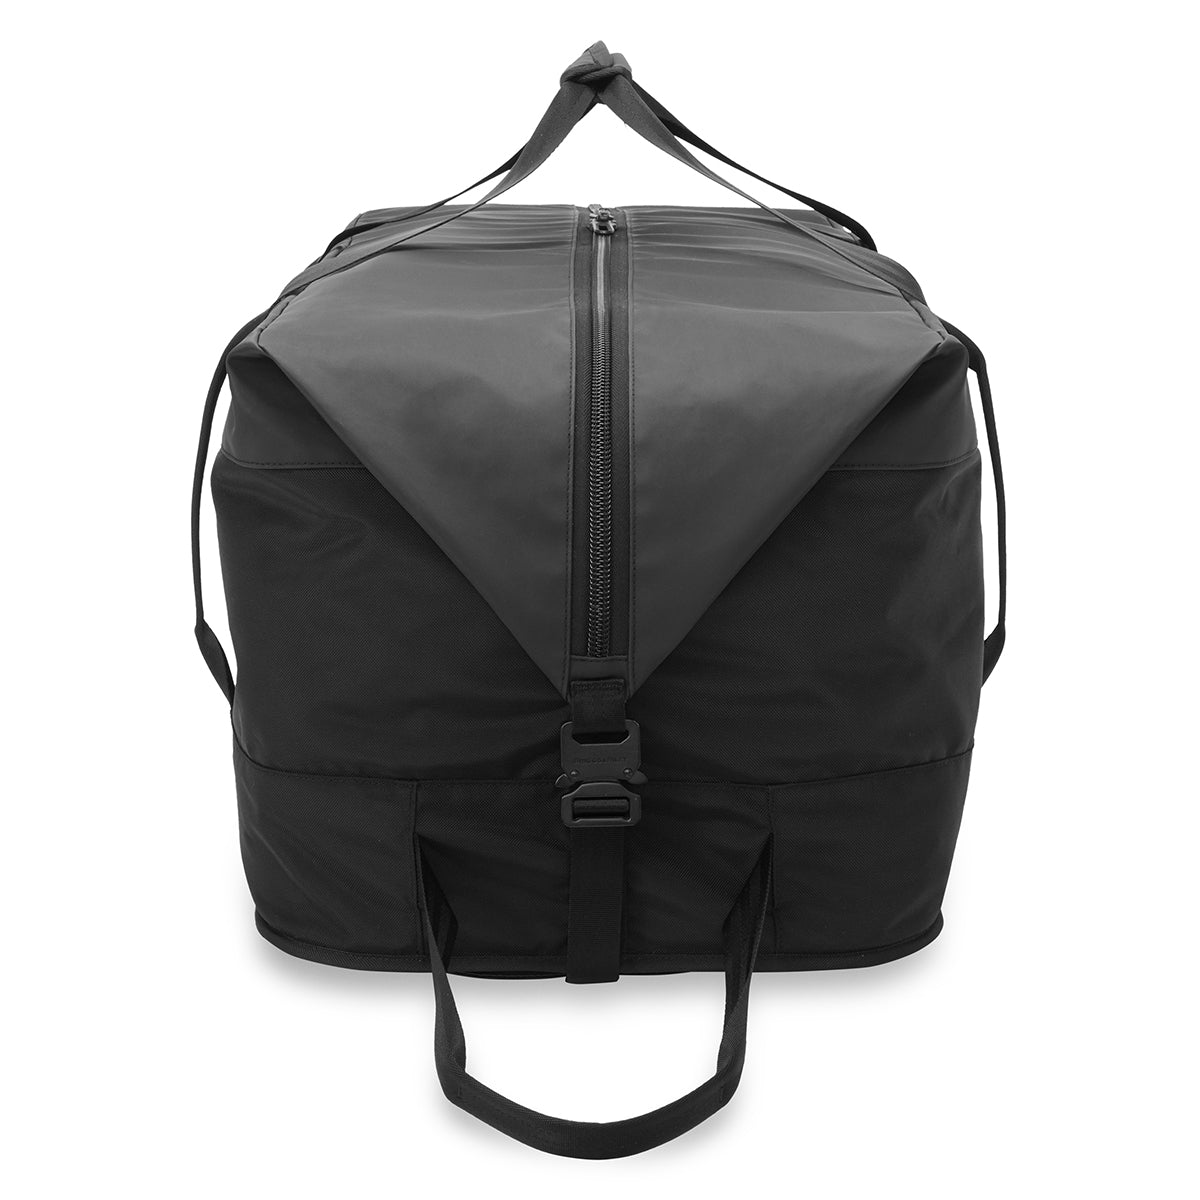 Briggs & Riley ZDX Extra Large Rolling Duffle Bag